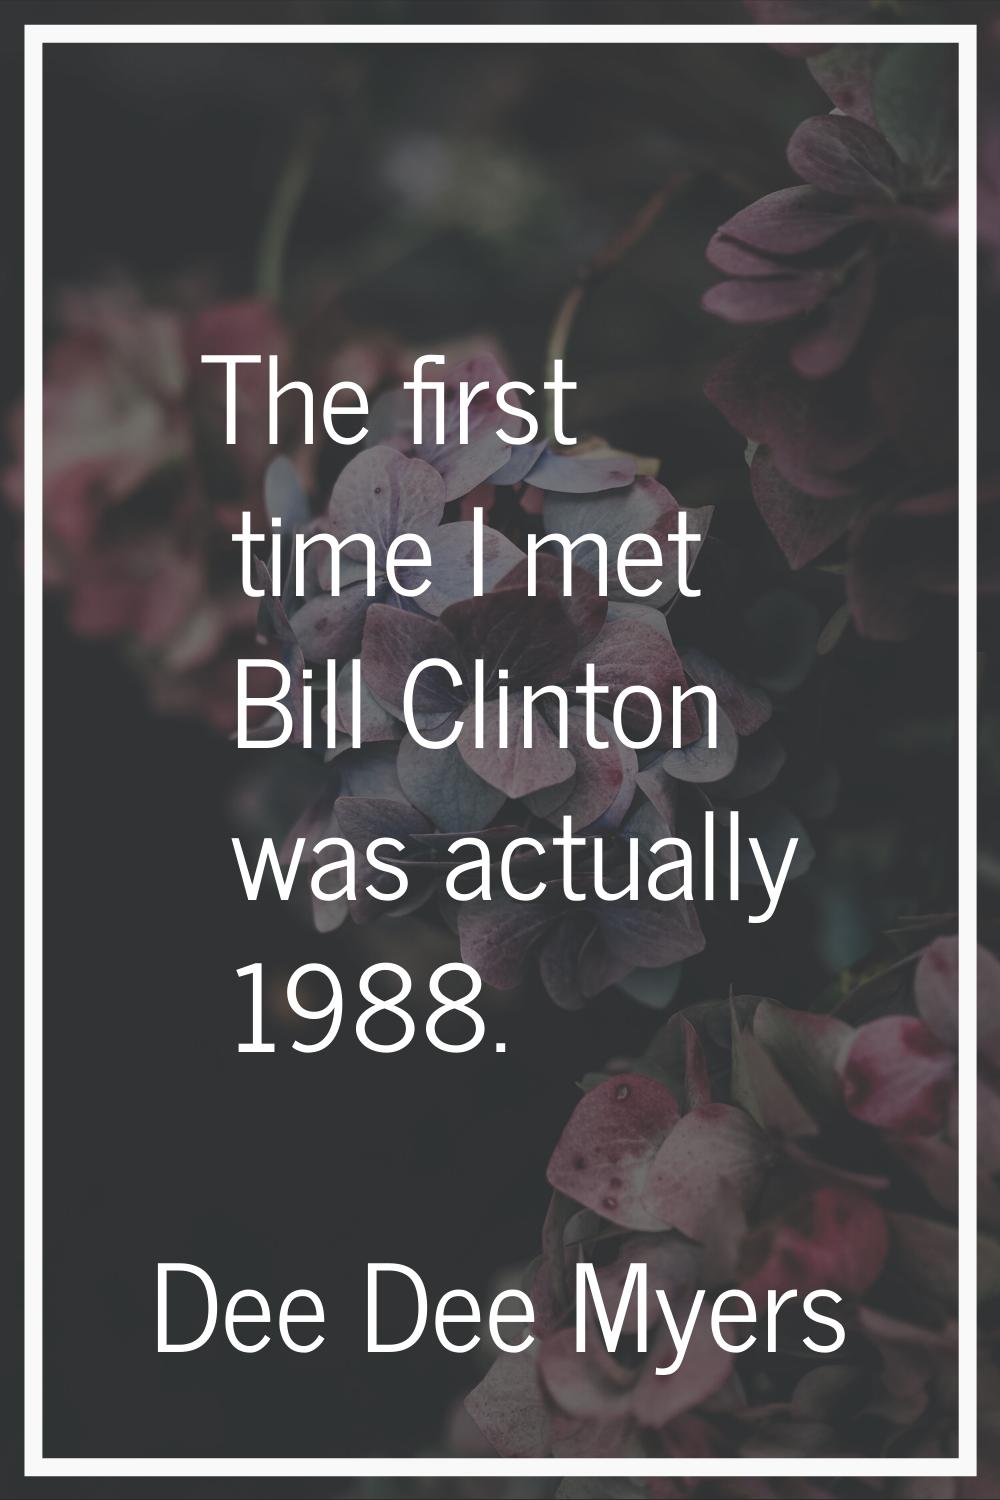 The first time I met Bill Clinton was actually 1988.